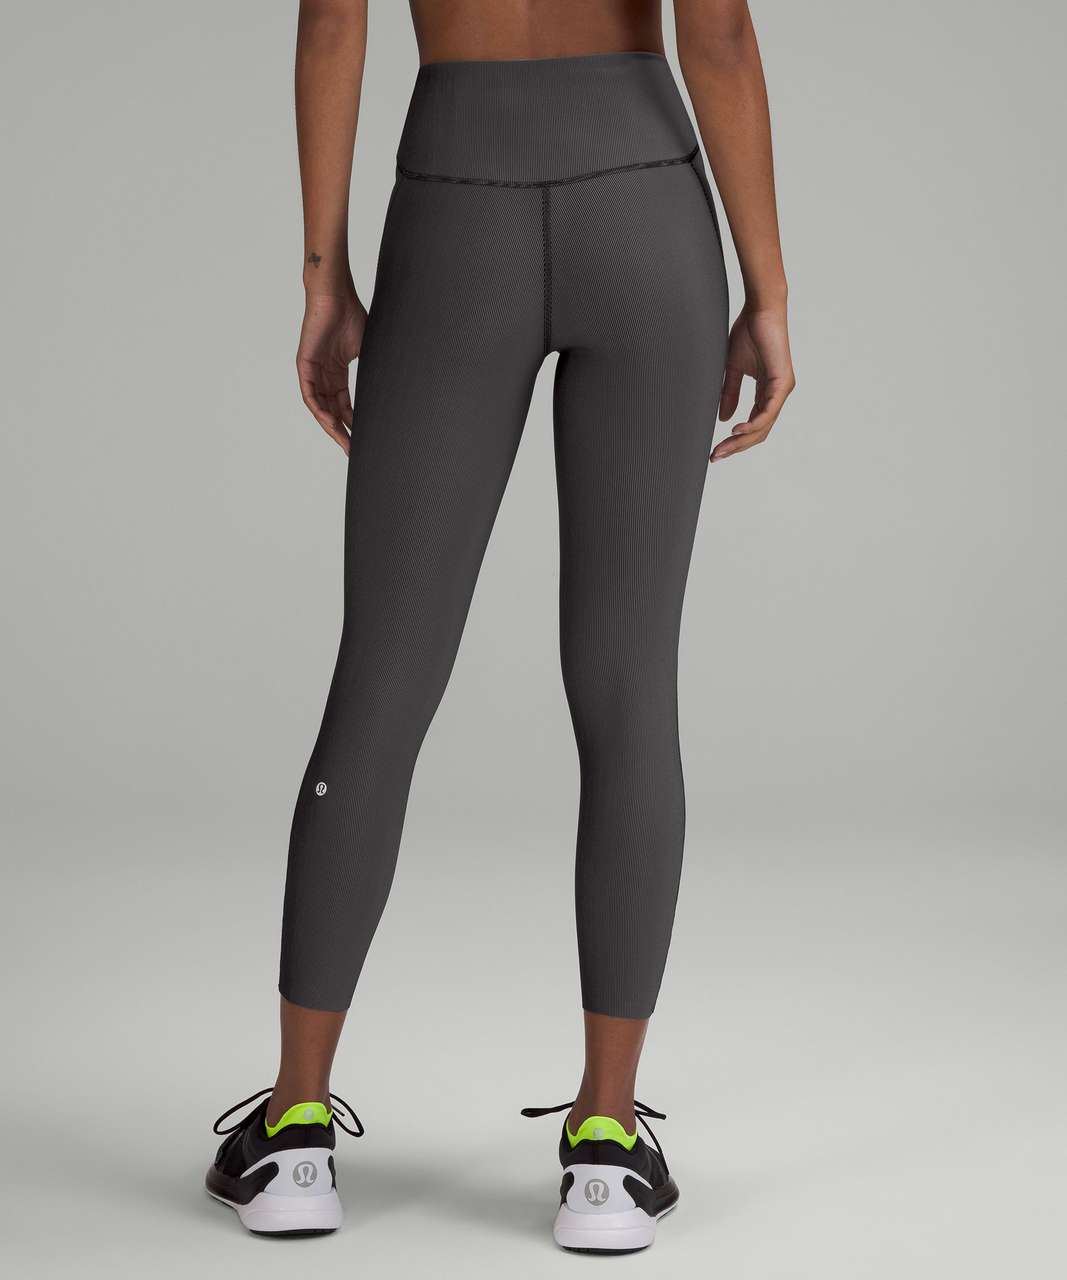 Base Pace High-Rise Ribbed Tight 25